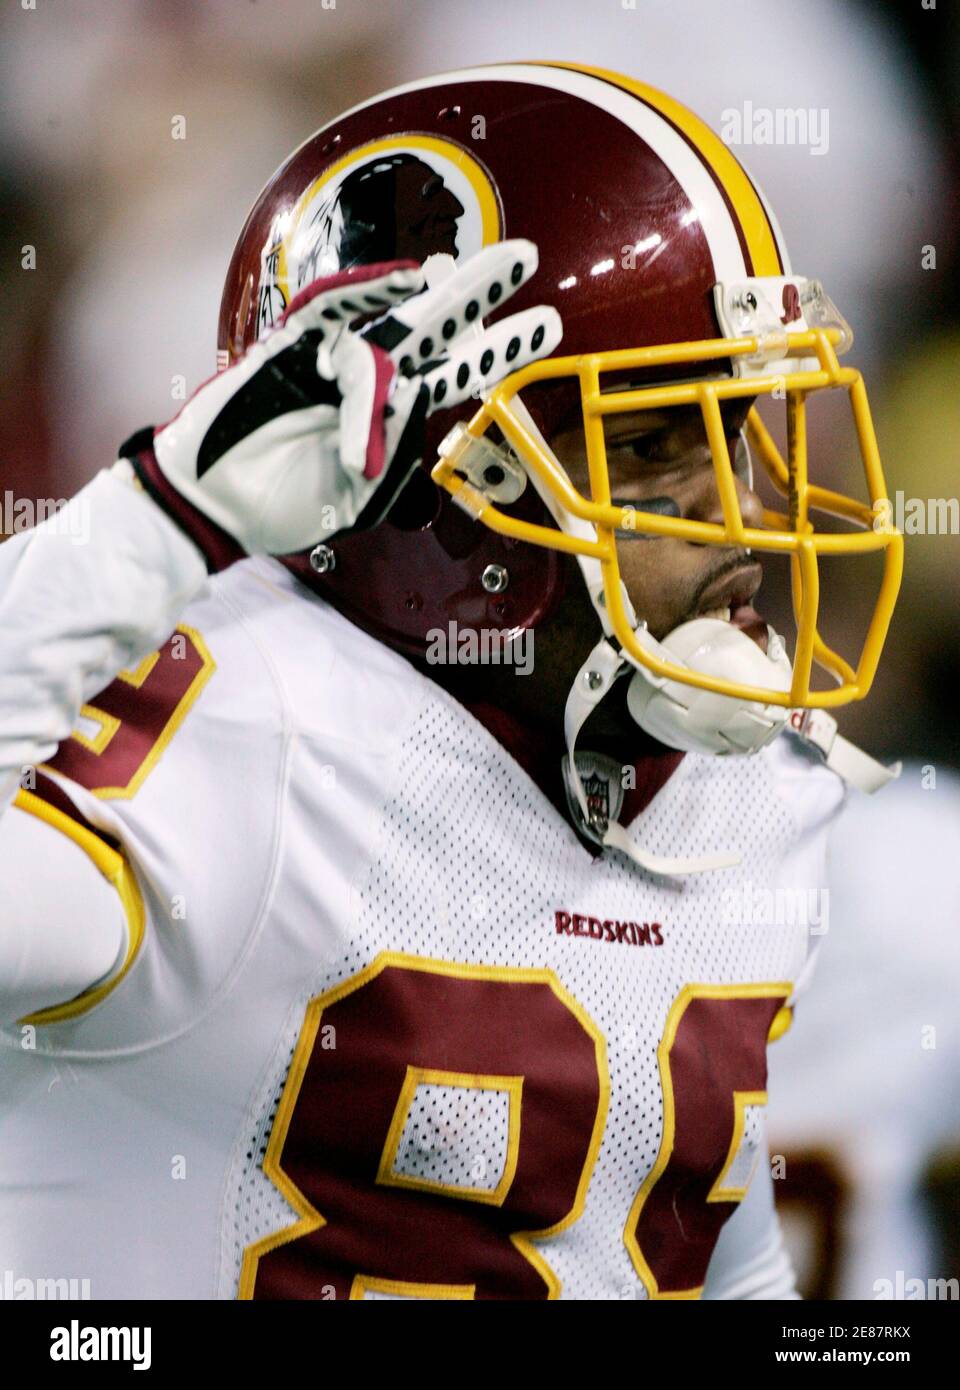 Washington Redskins' receiver Santana Moss salutes the crowd after catching the game-winning touchdown pass against the Cleveland Browns in the fourth quarter of their NFL football game in Landover, Maryland October 19, 2008. REUTERS/Gary Cameron   (UNITED STATES) Stock Photo